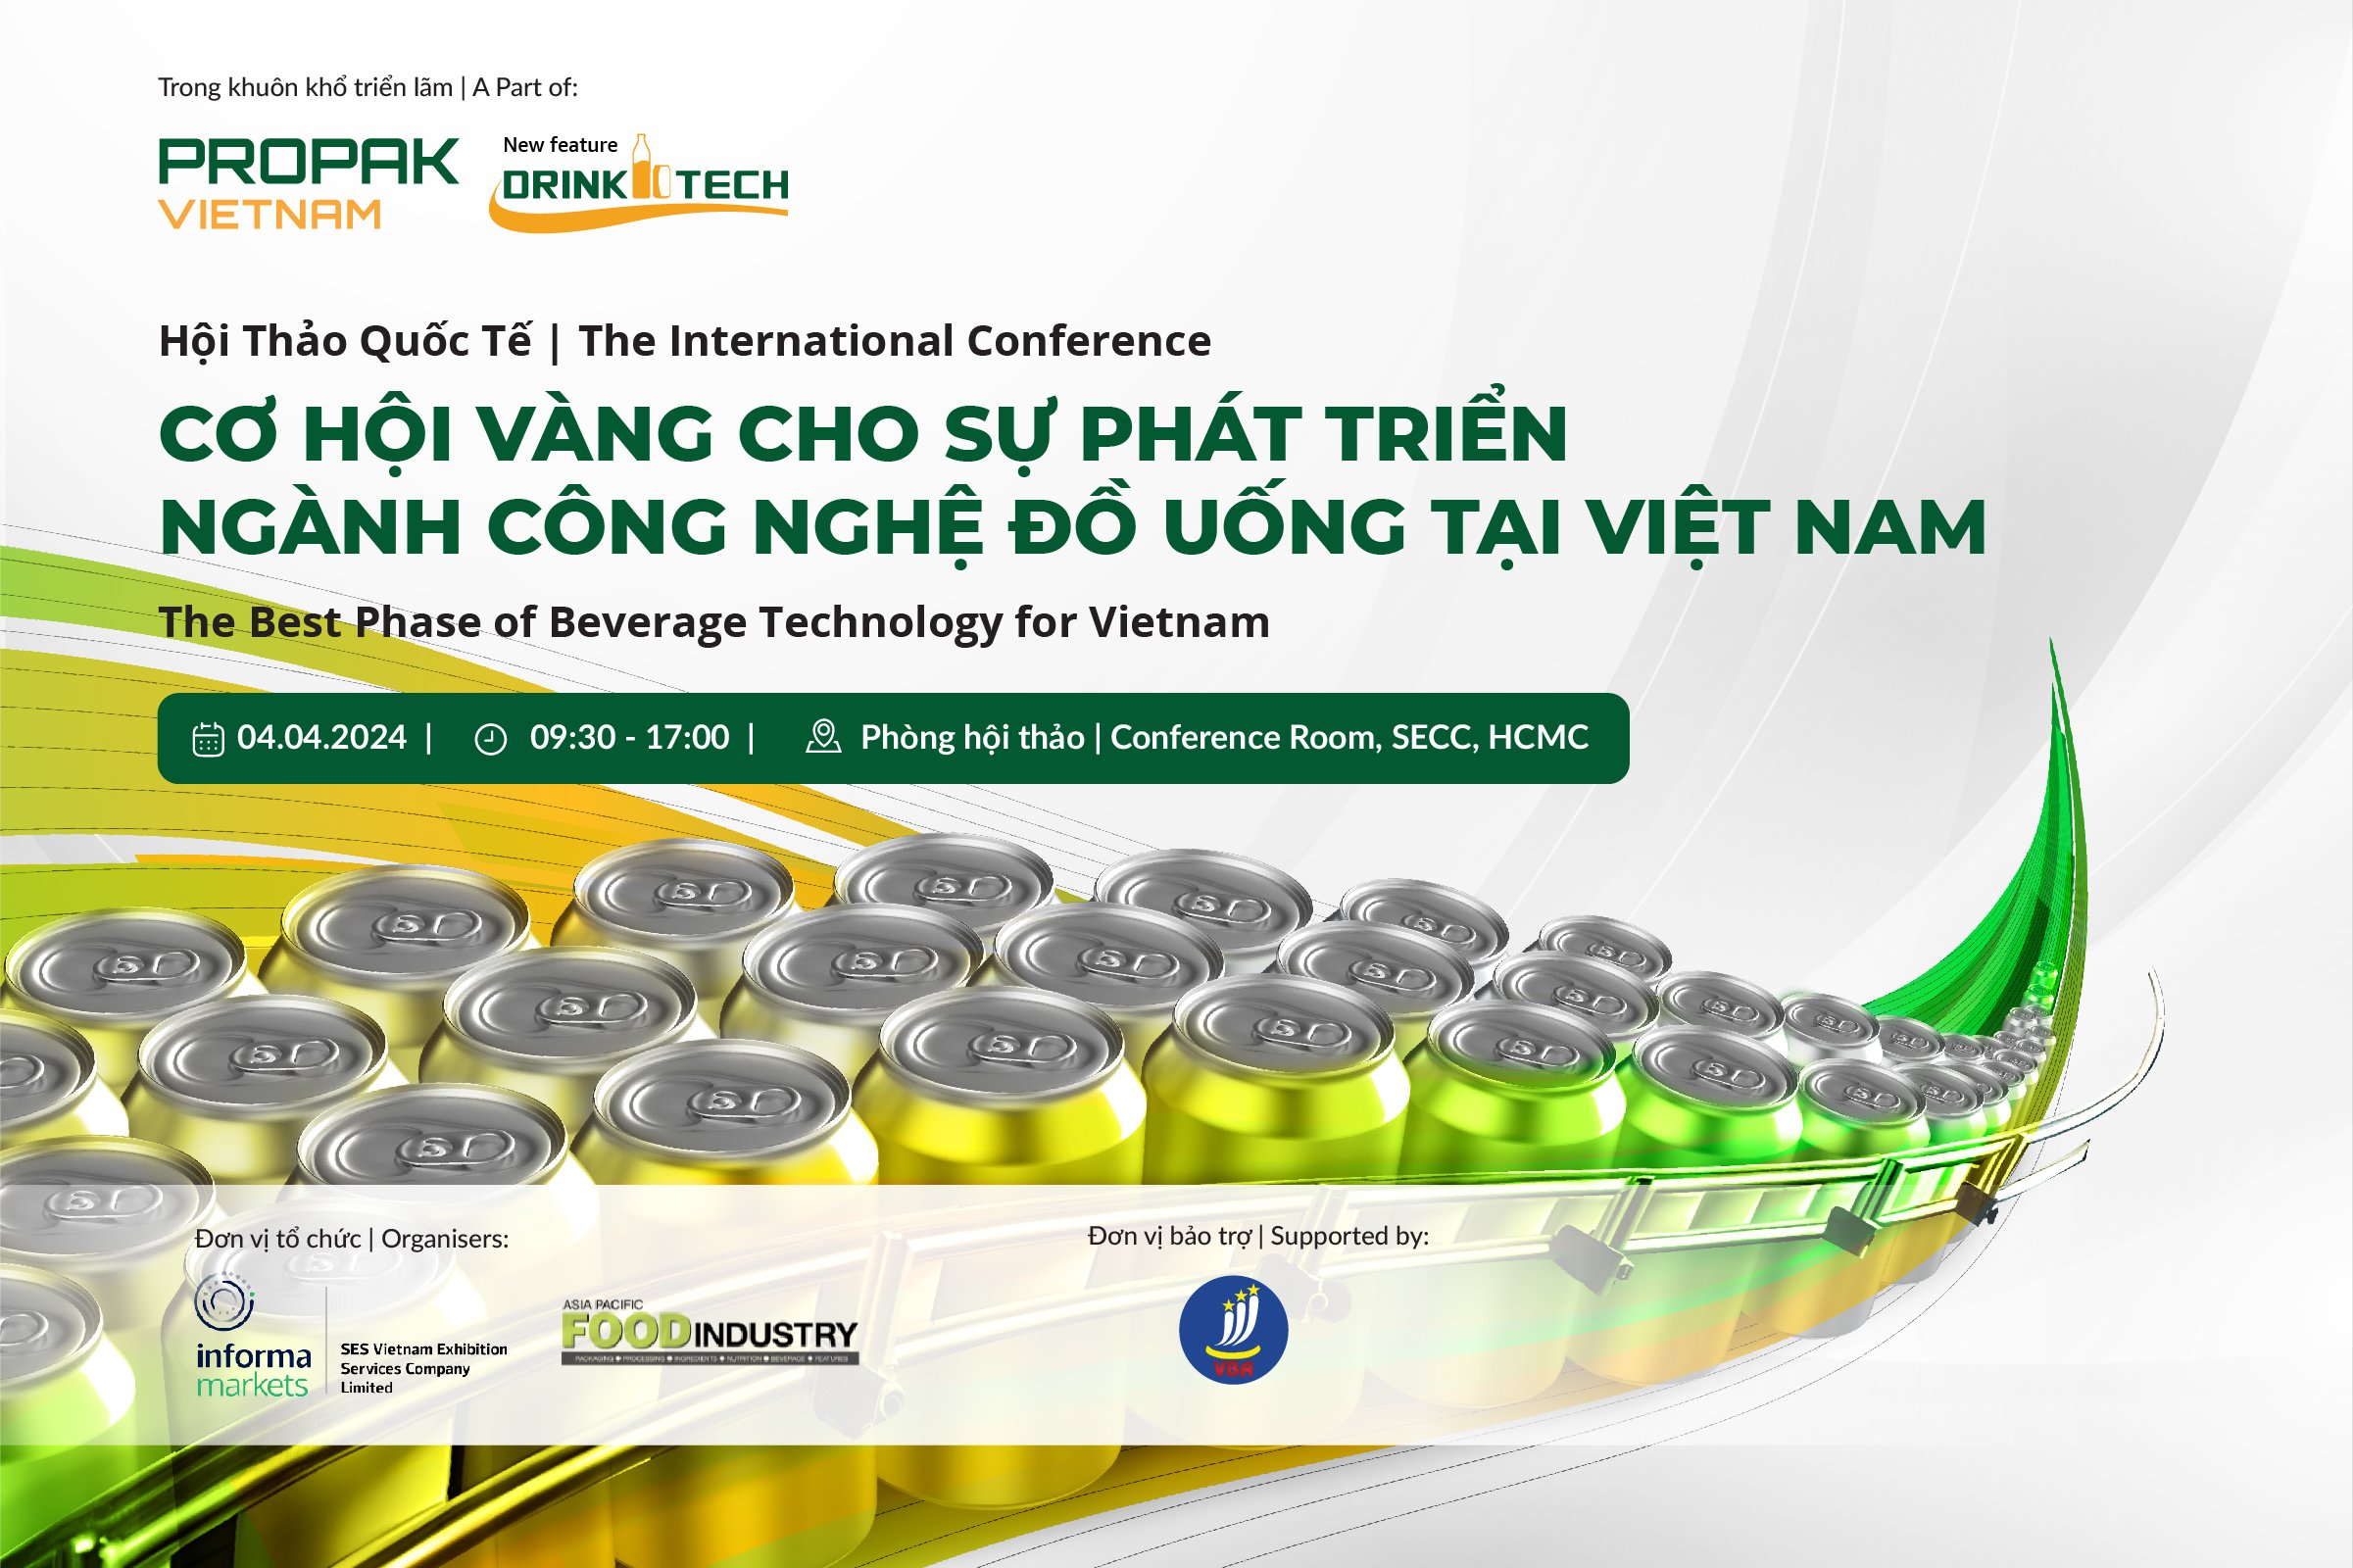 The International Conference: The Best Phase of Beverage Technology for Vietnam